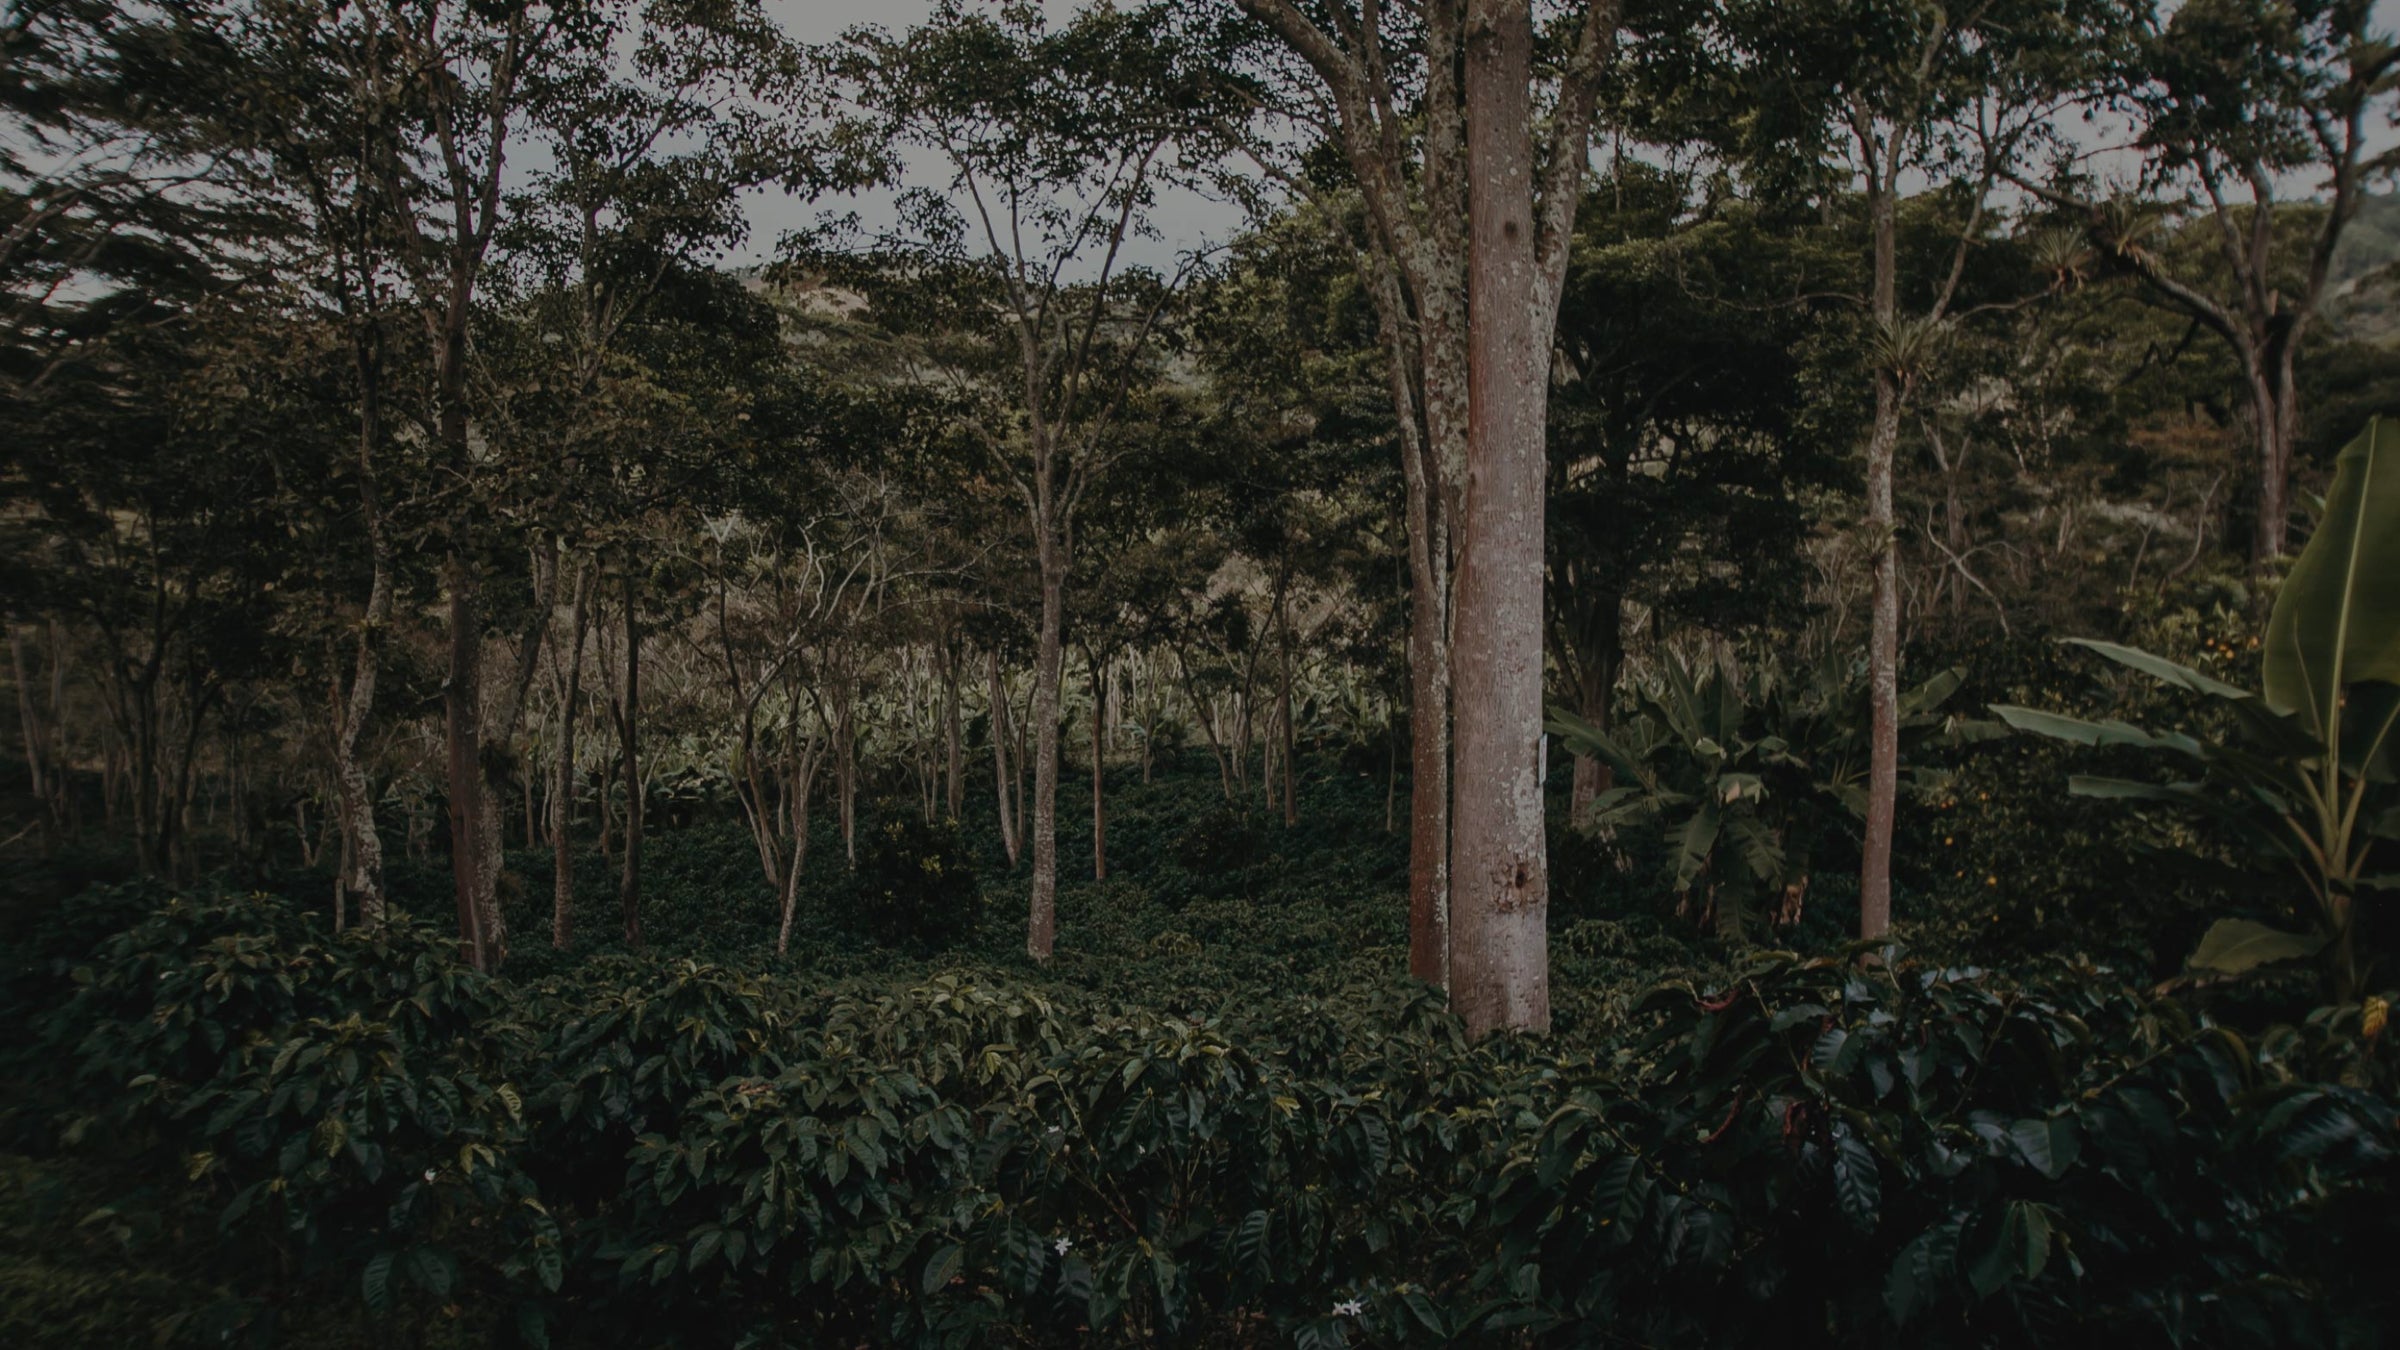 Coffee farm with trees and other vegetation